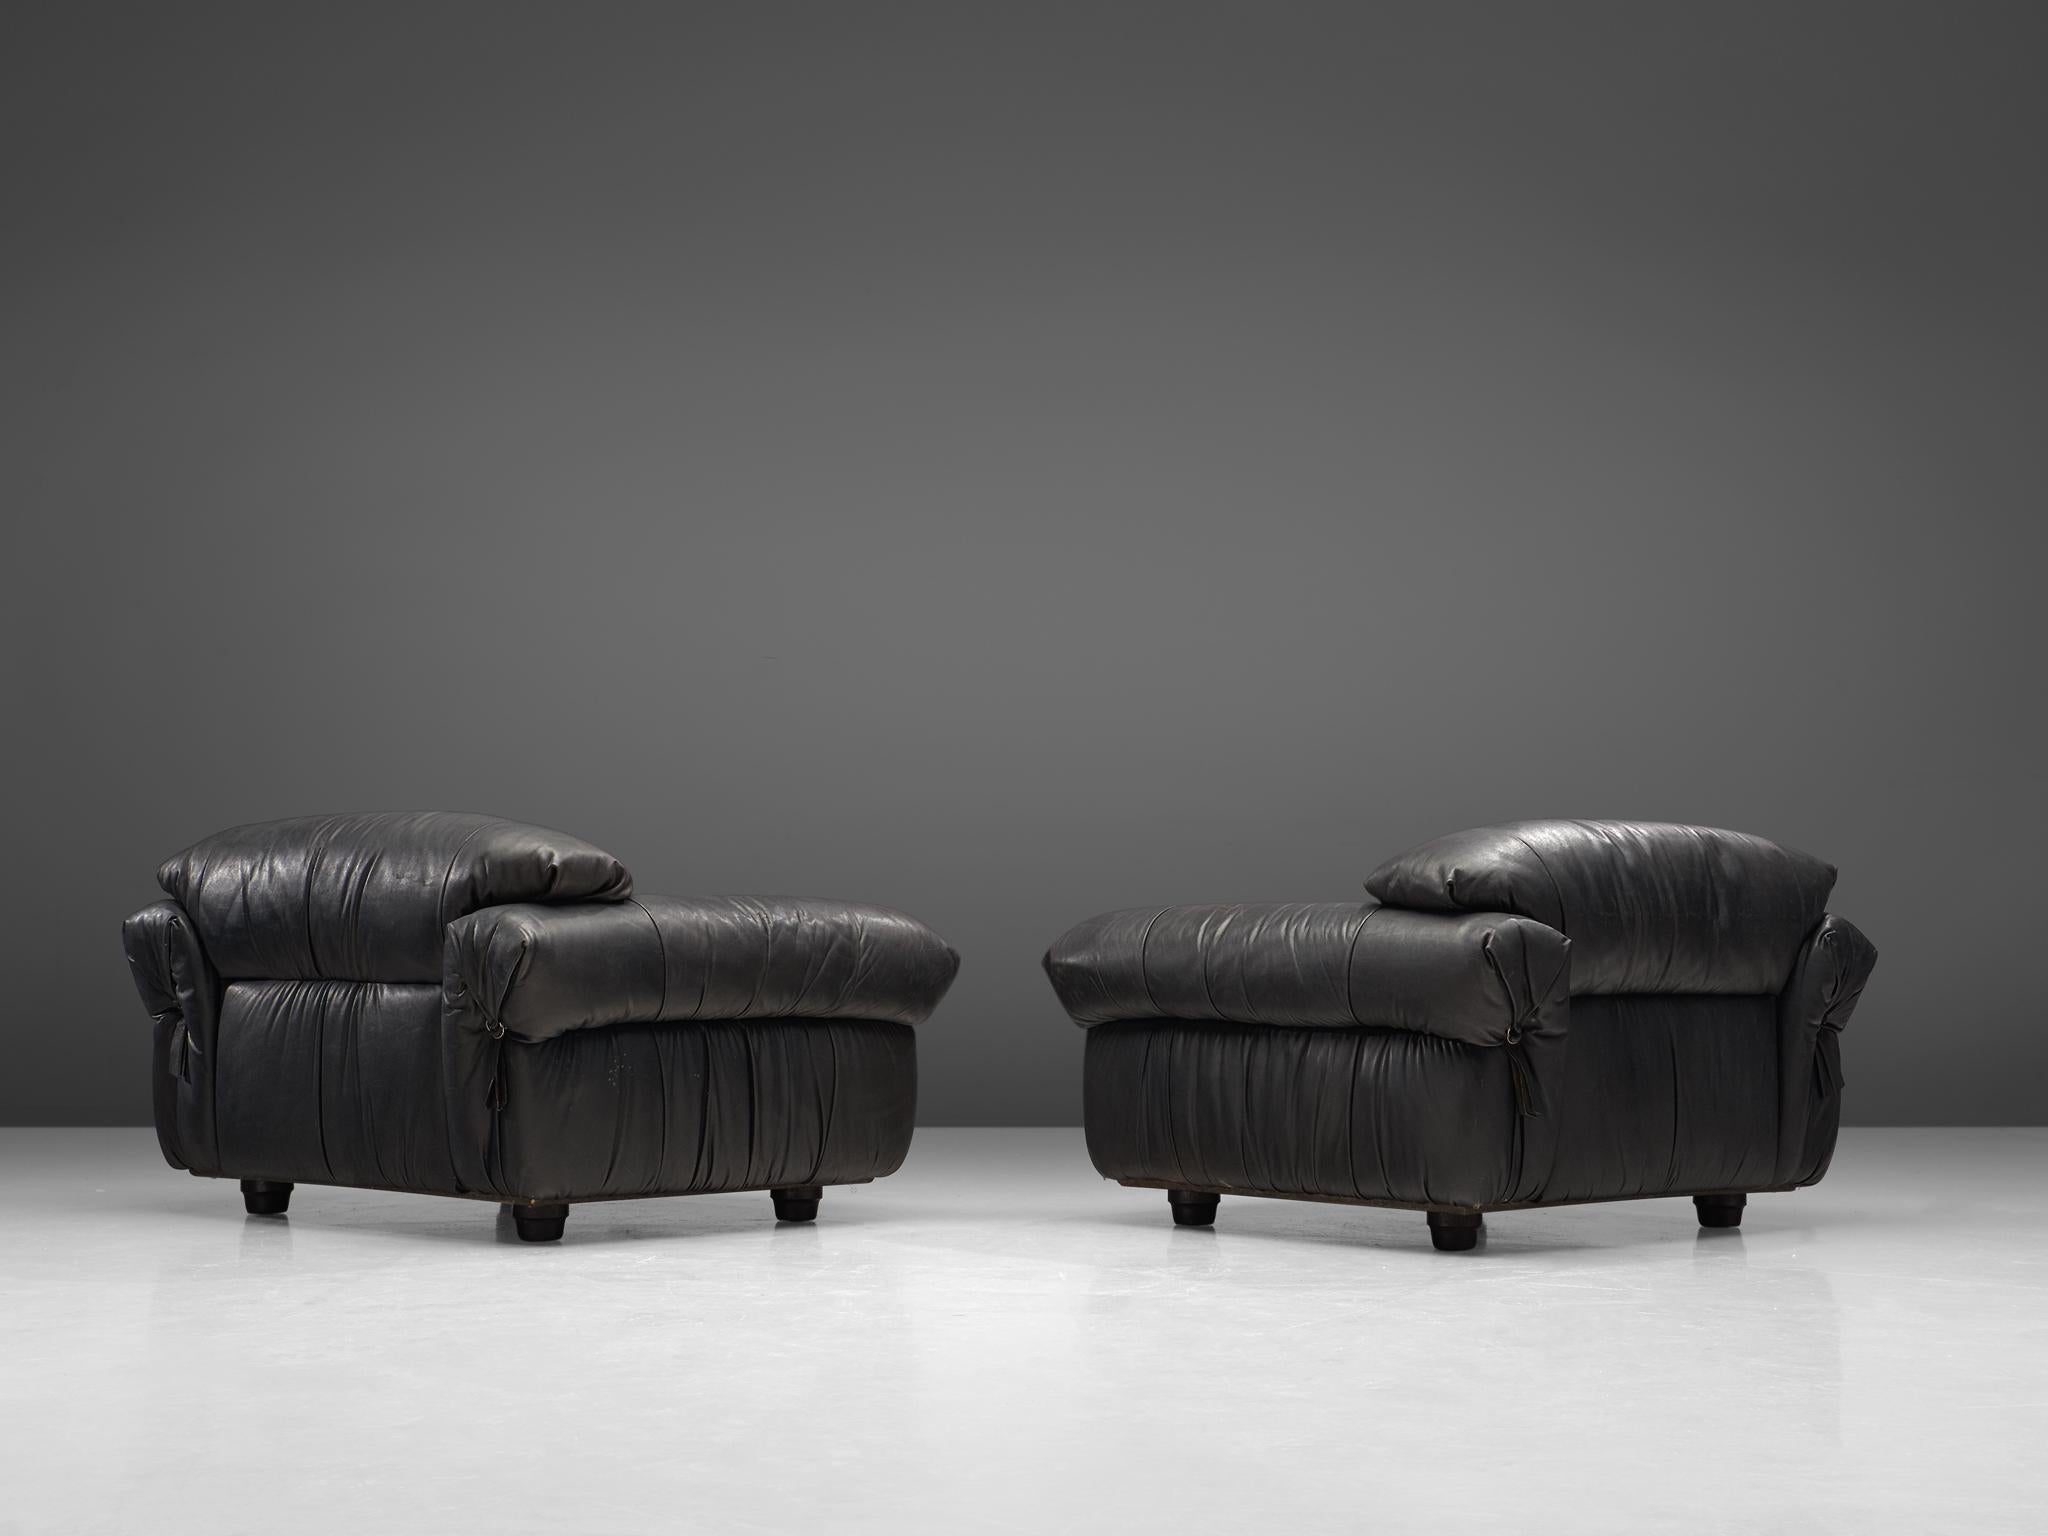 Italian Set of two Grand Lounge Chairs in Black Patinated Leather, 1970s